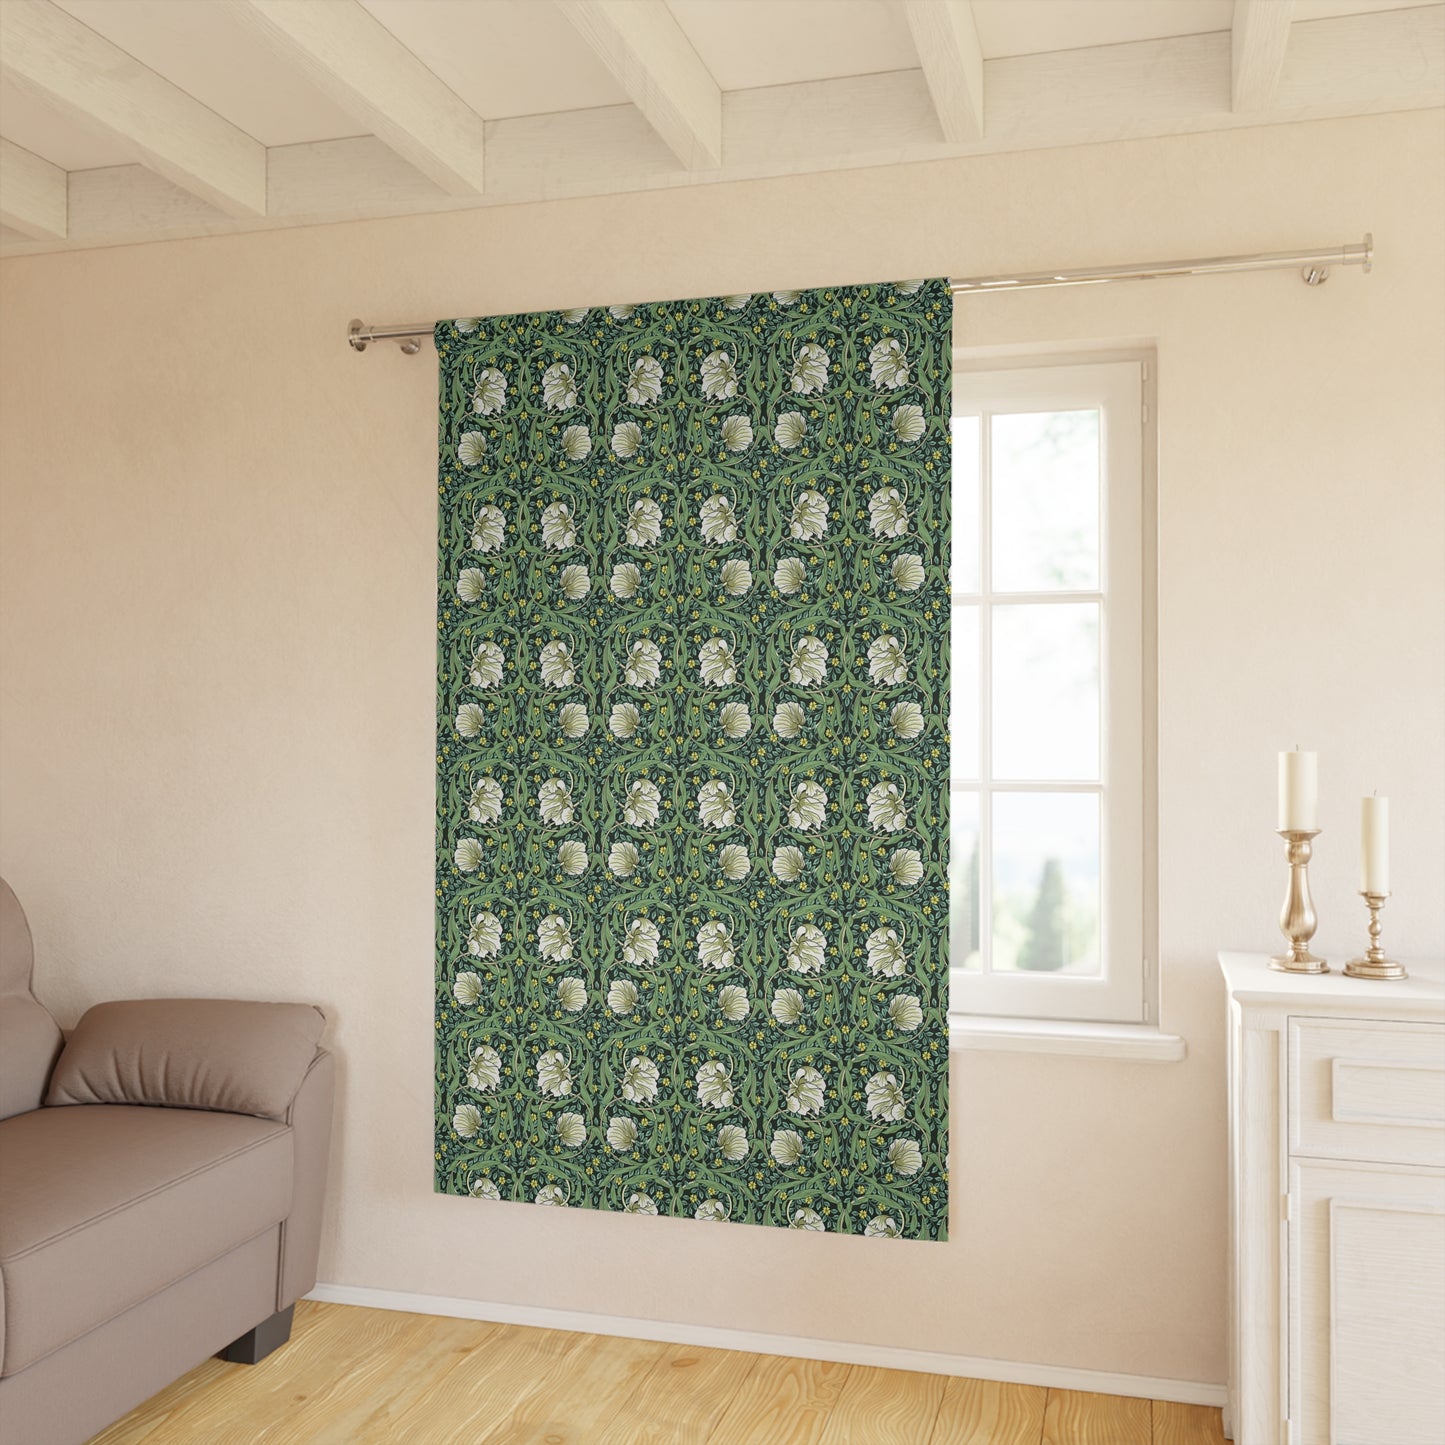 william-morris-co-blackout-window-curtain-1-piece-pimpernel-collection-green-3william-morris-co-blackout-window-curtain-1-piece-pimpernel-collection-green-3